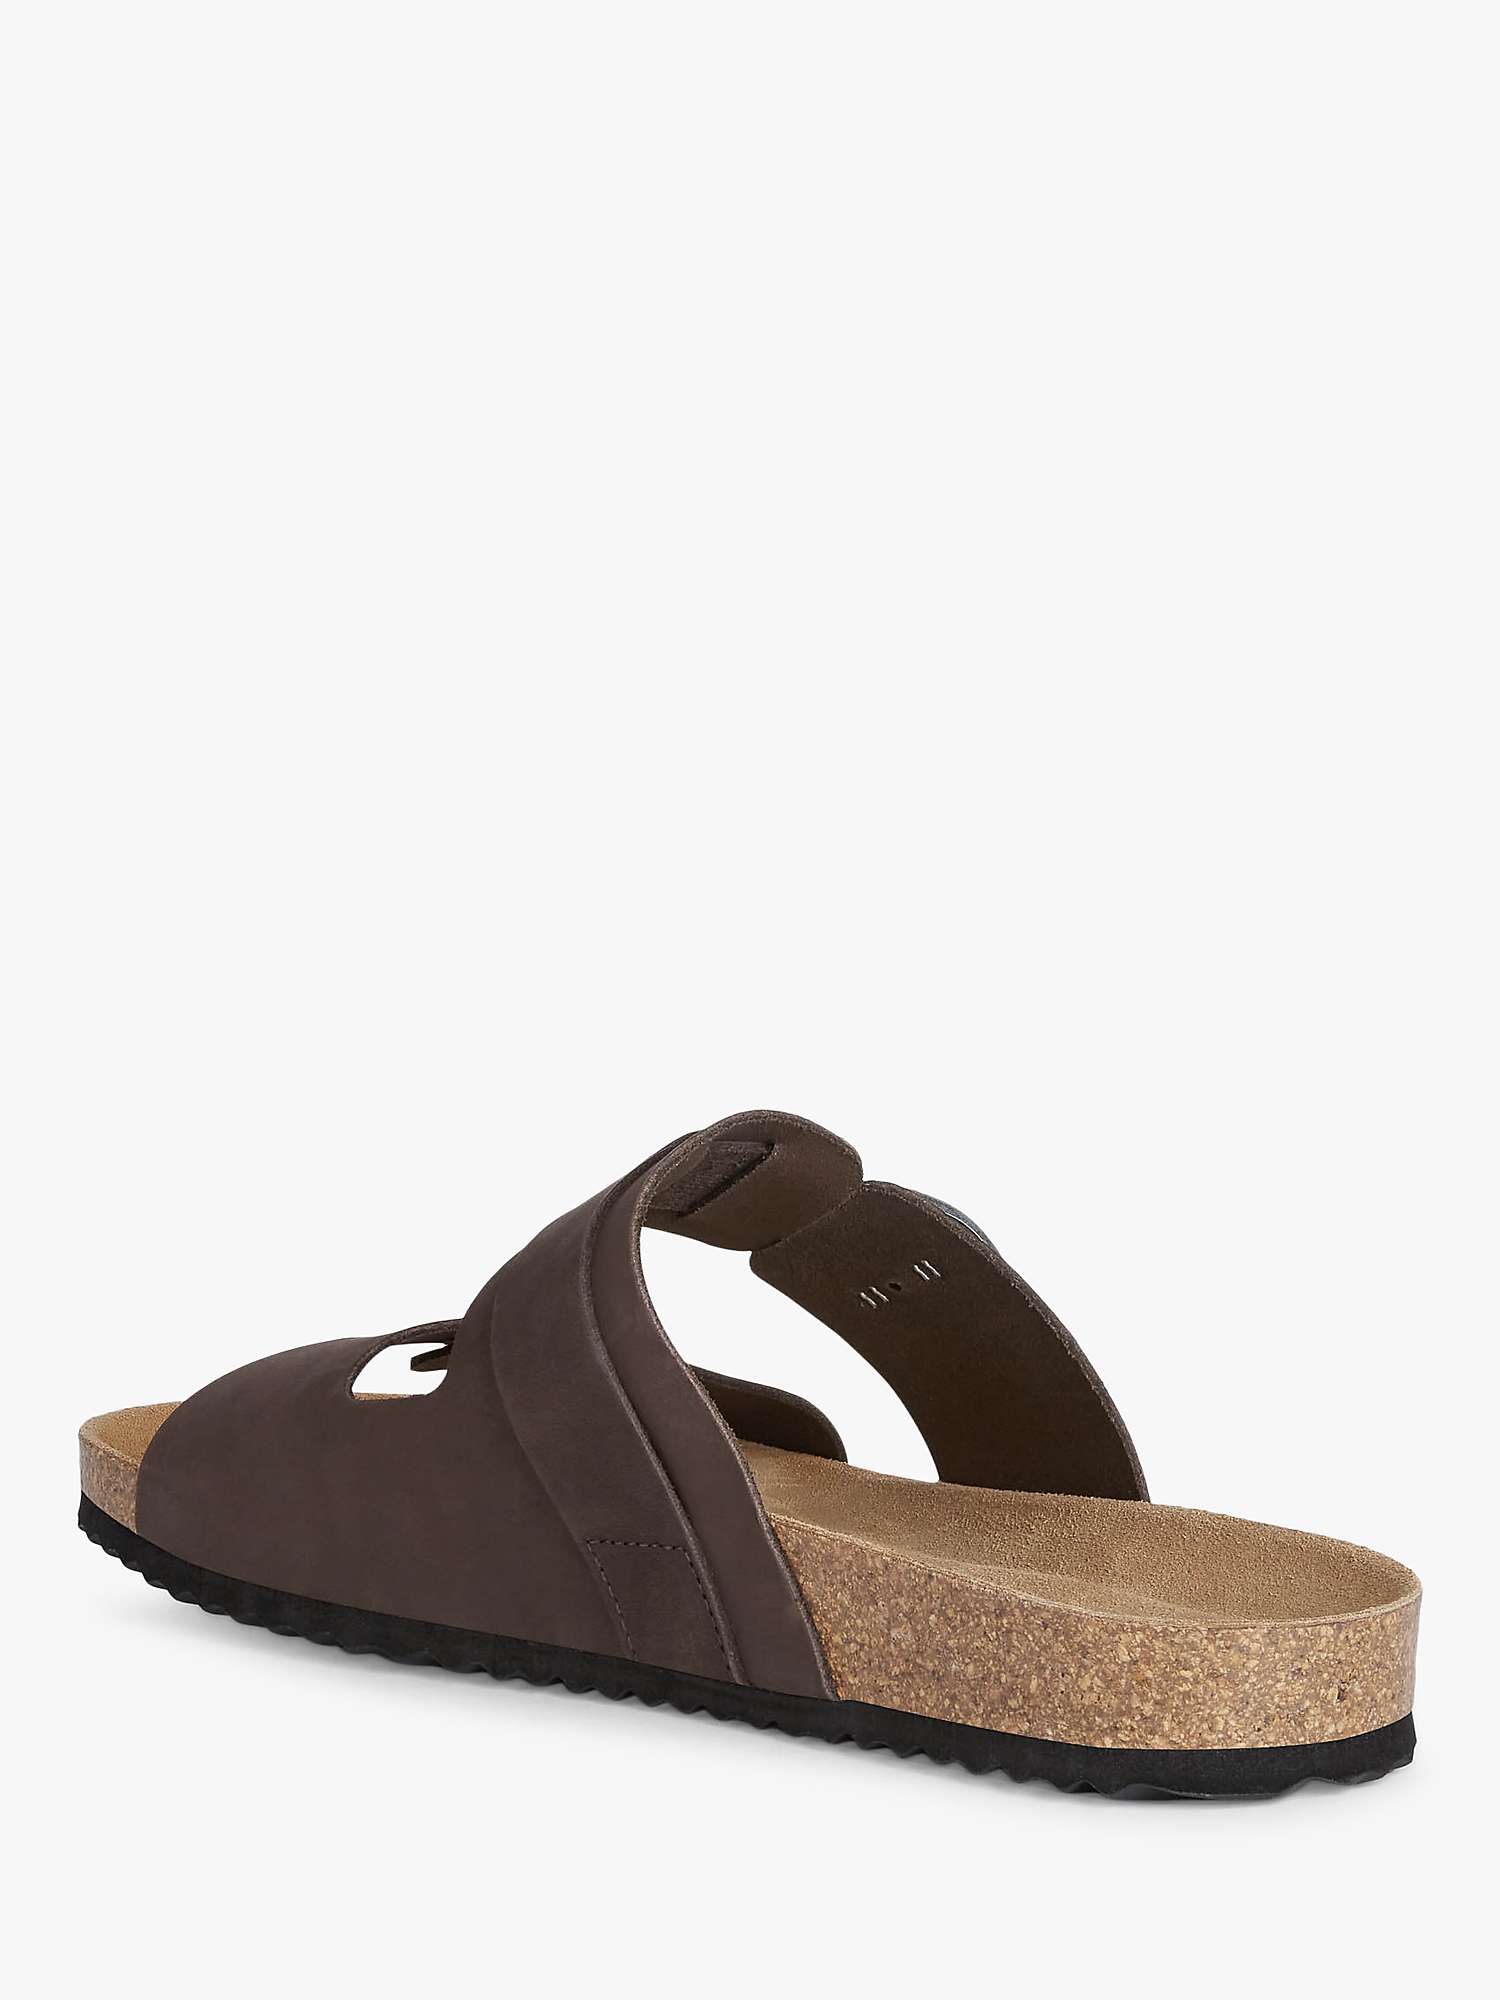 Buy Geox Ghita Leather Footbed Sandals Online at johnlewis.com